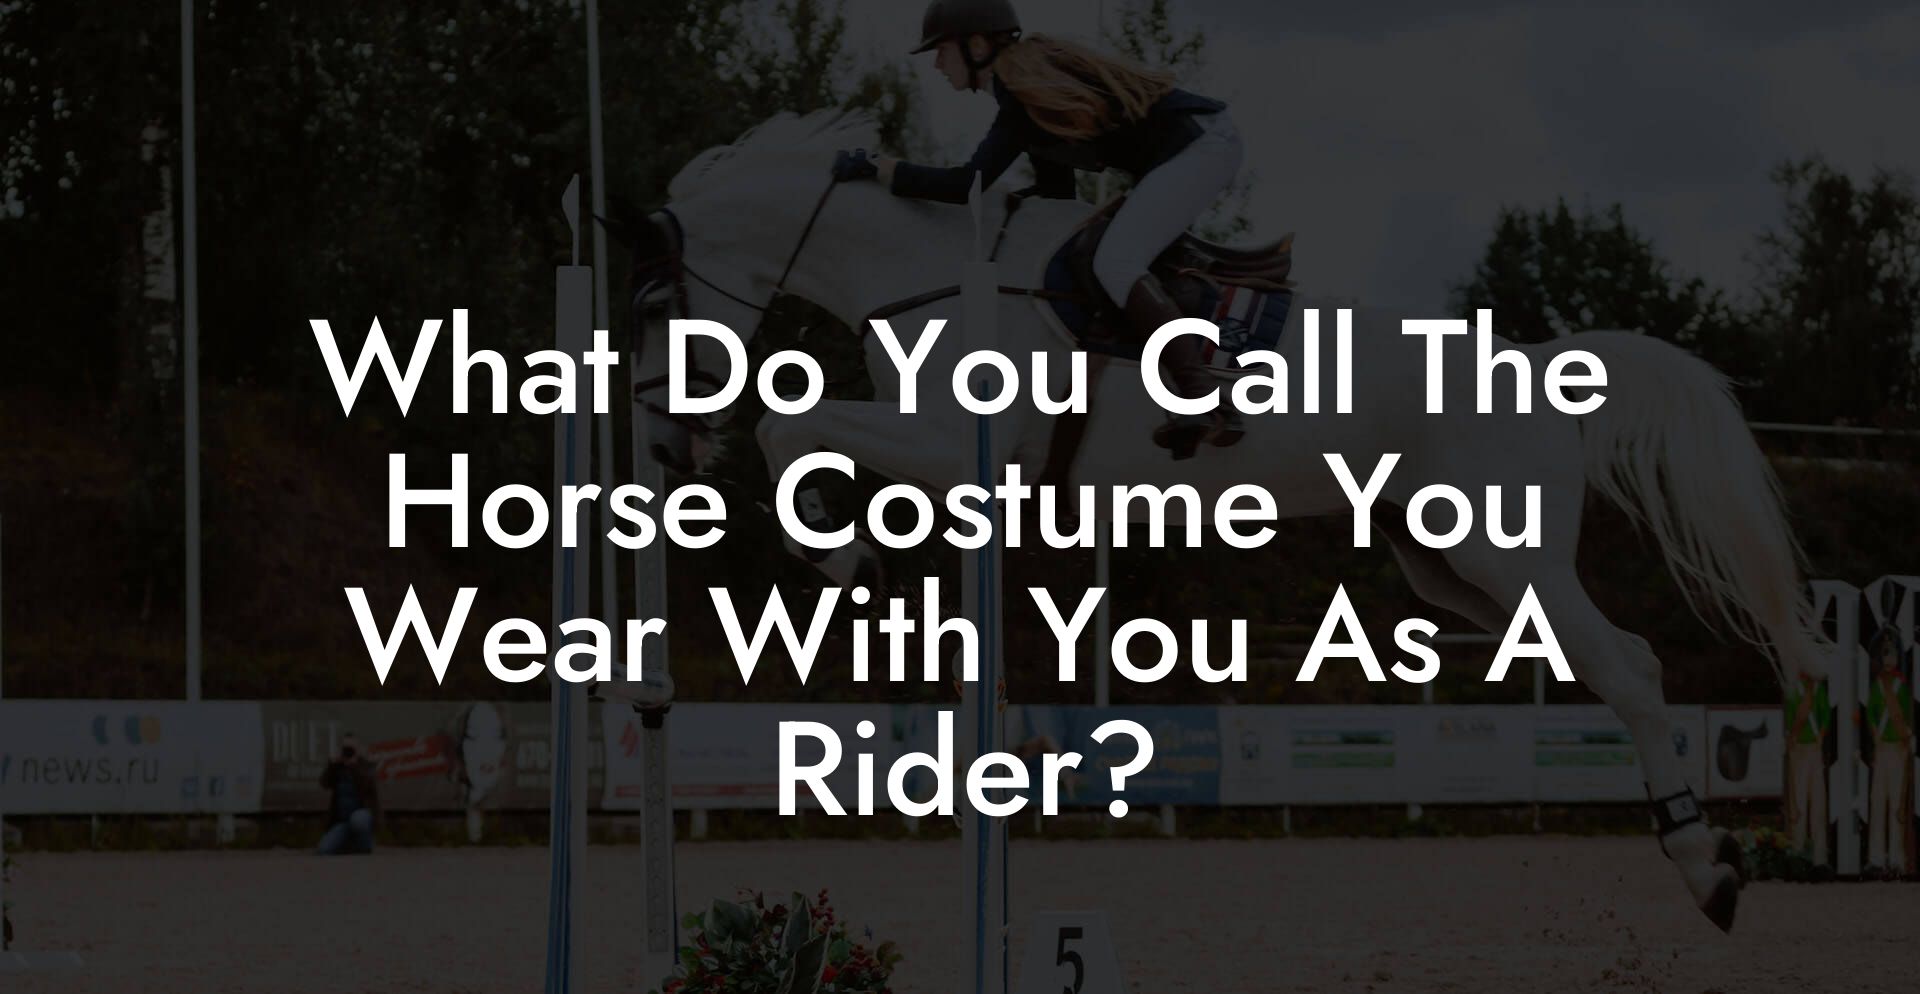 What Do You Call The Horse Costume You Wear With You As A Rider?